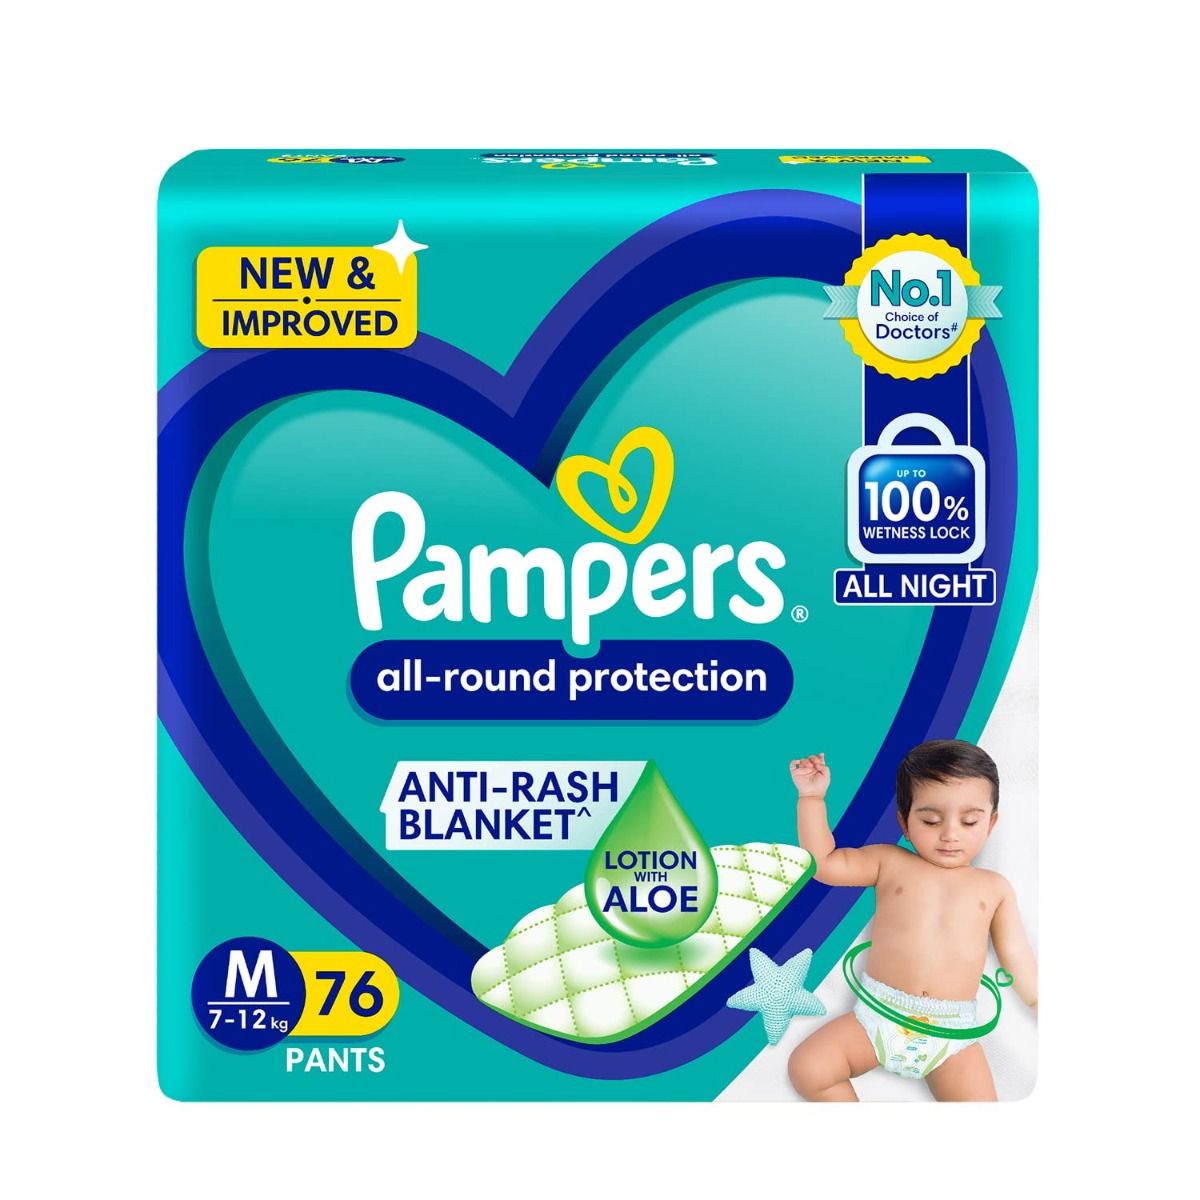 Buy Pampers All-Round Protection Diaper Pants Medium, 76 Count Online